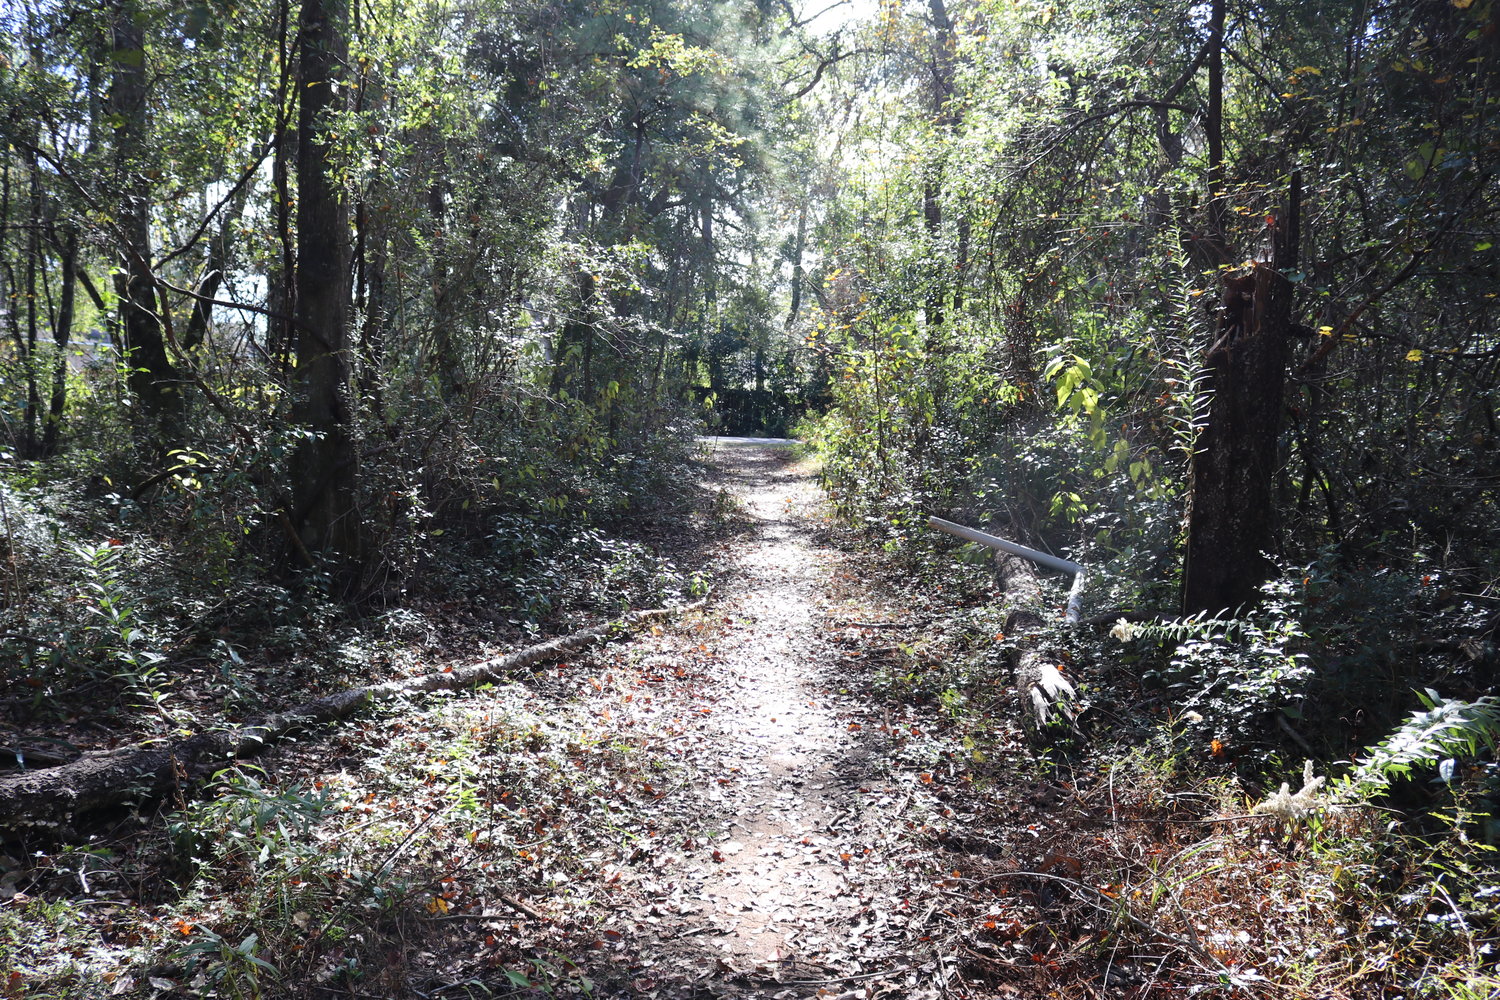 Trails extend into the Dyas Triangle in Fairhope. City officials are working to prepare plans to develop the property as a municipal nature park.